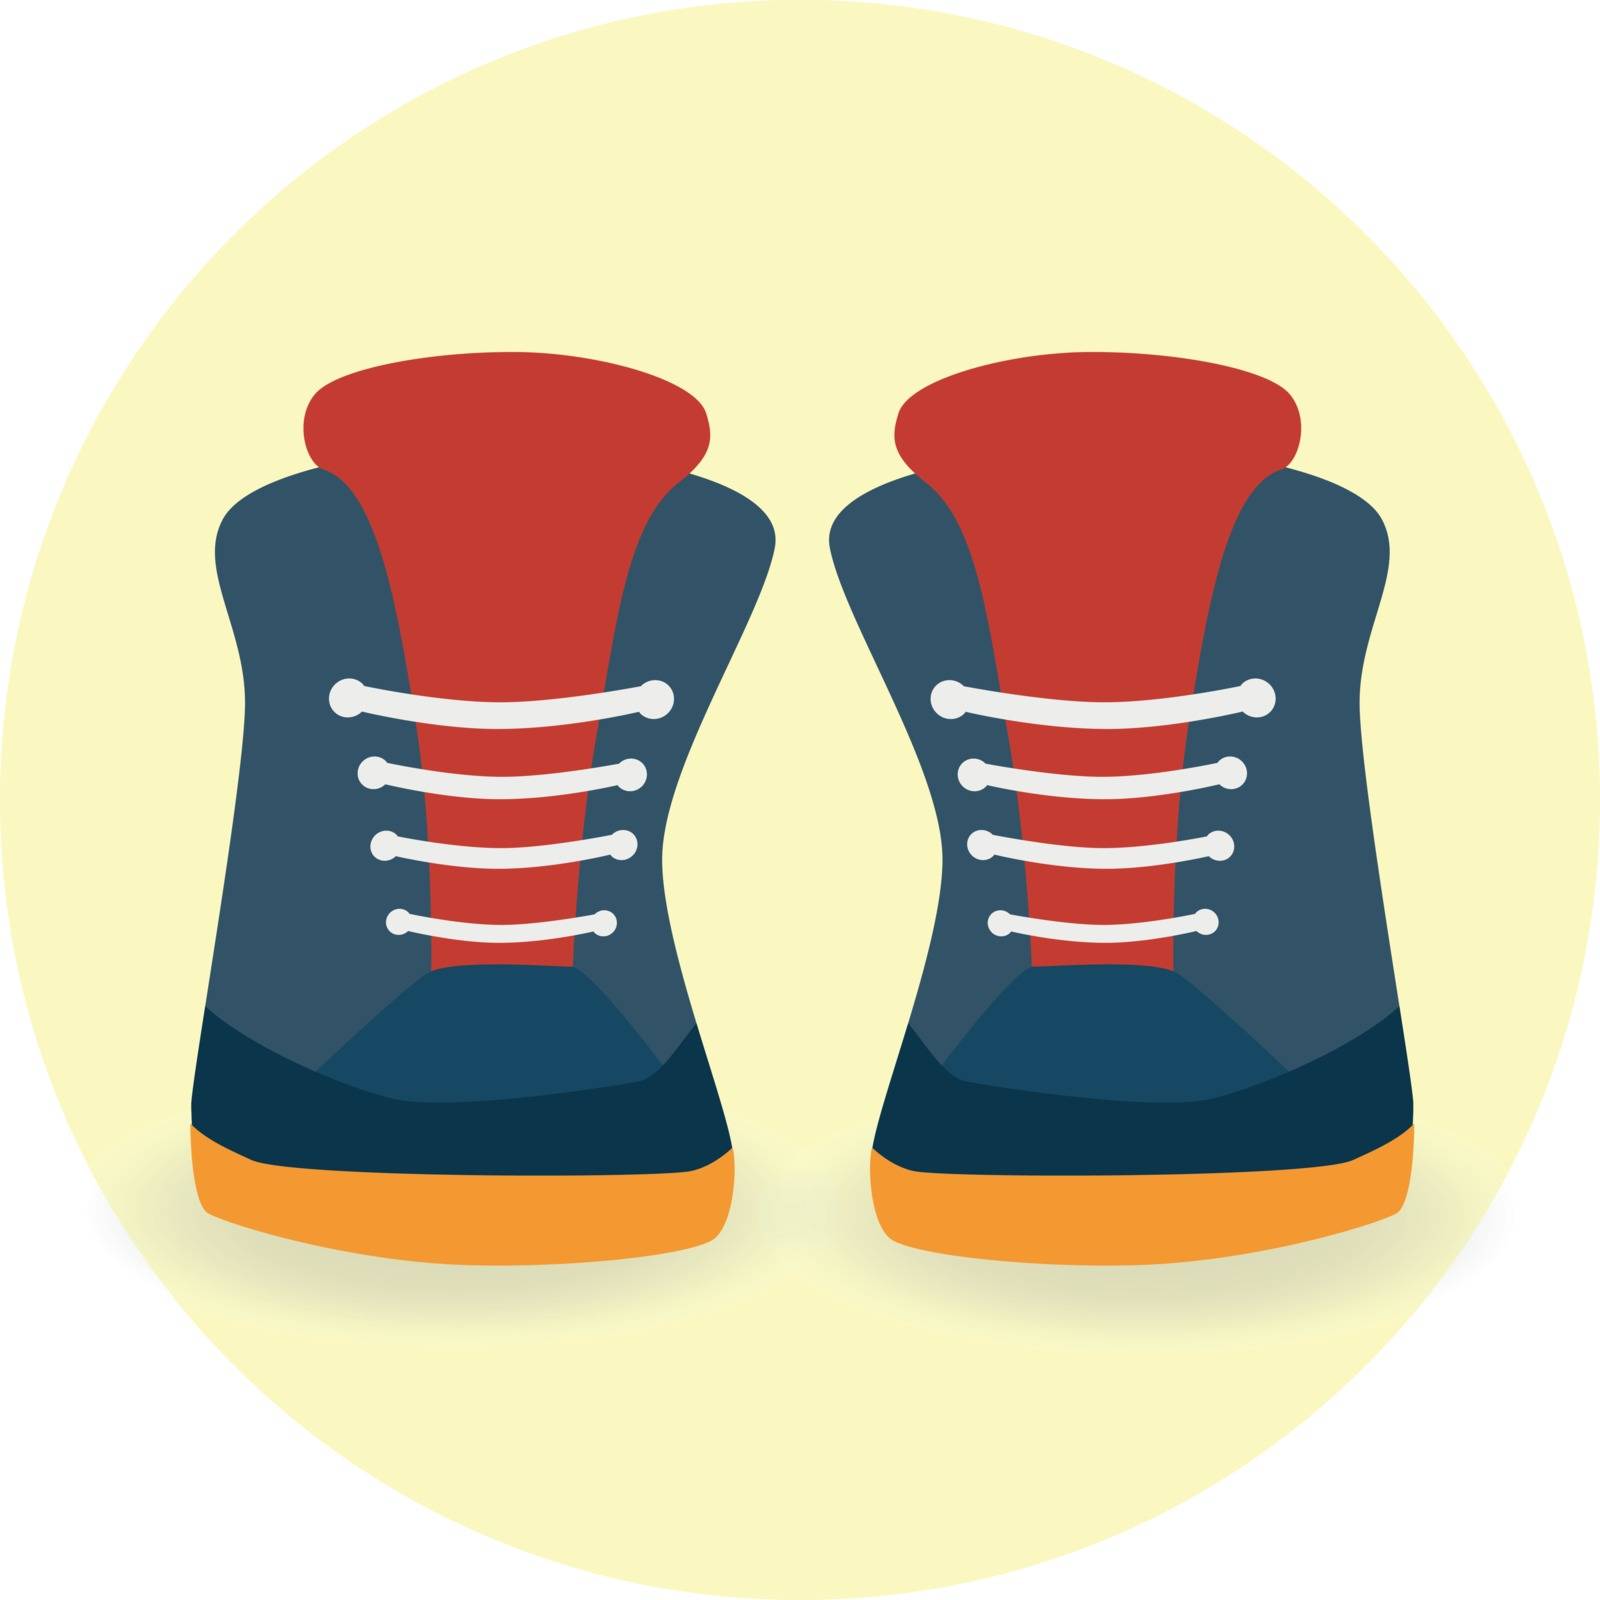 Sneakers shoes. Sneakers isolated. Flat vector illustration